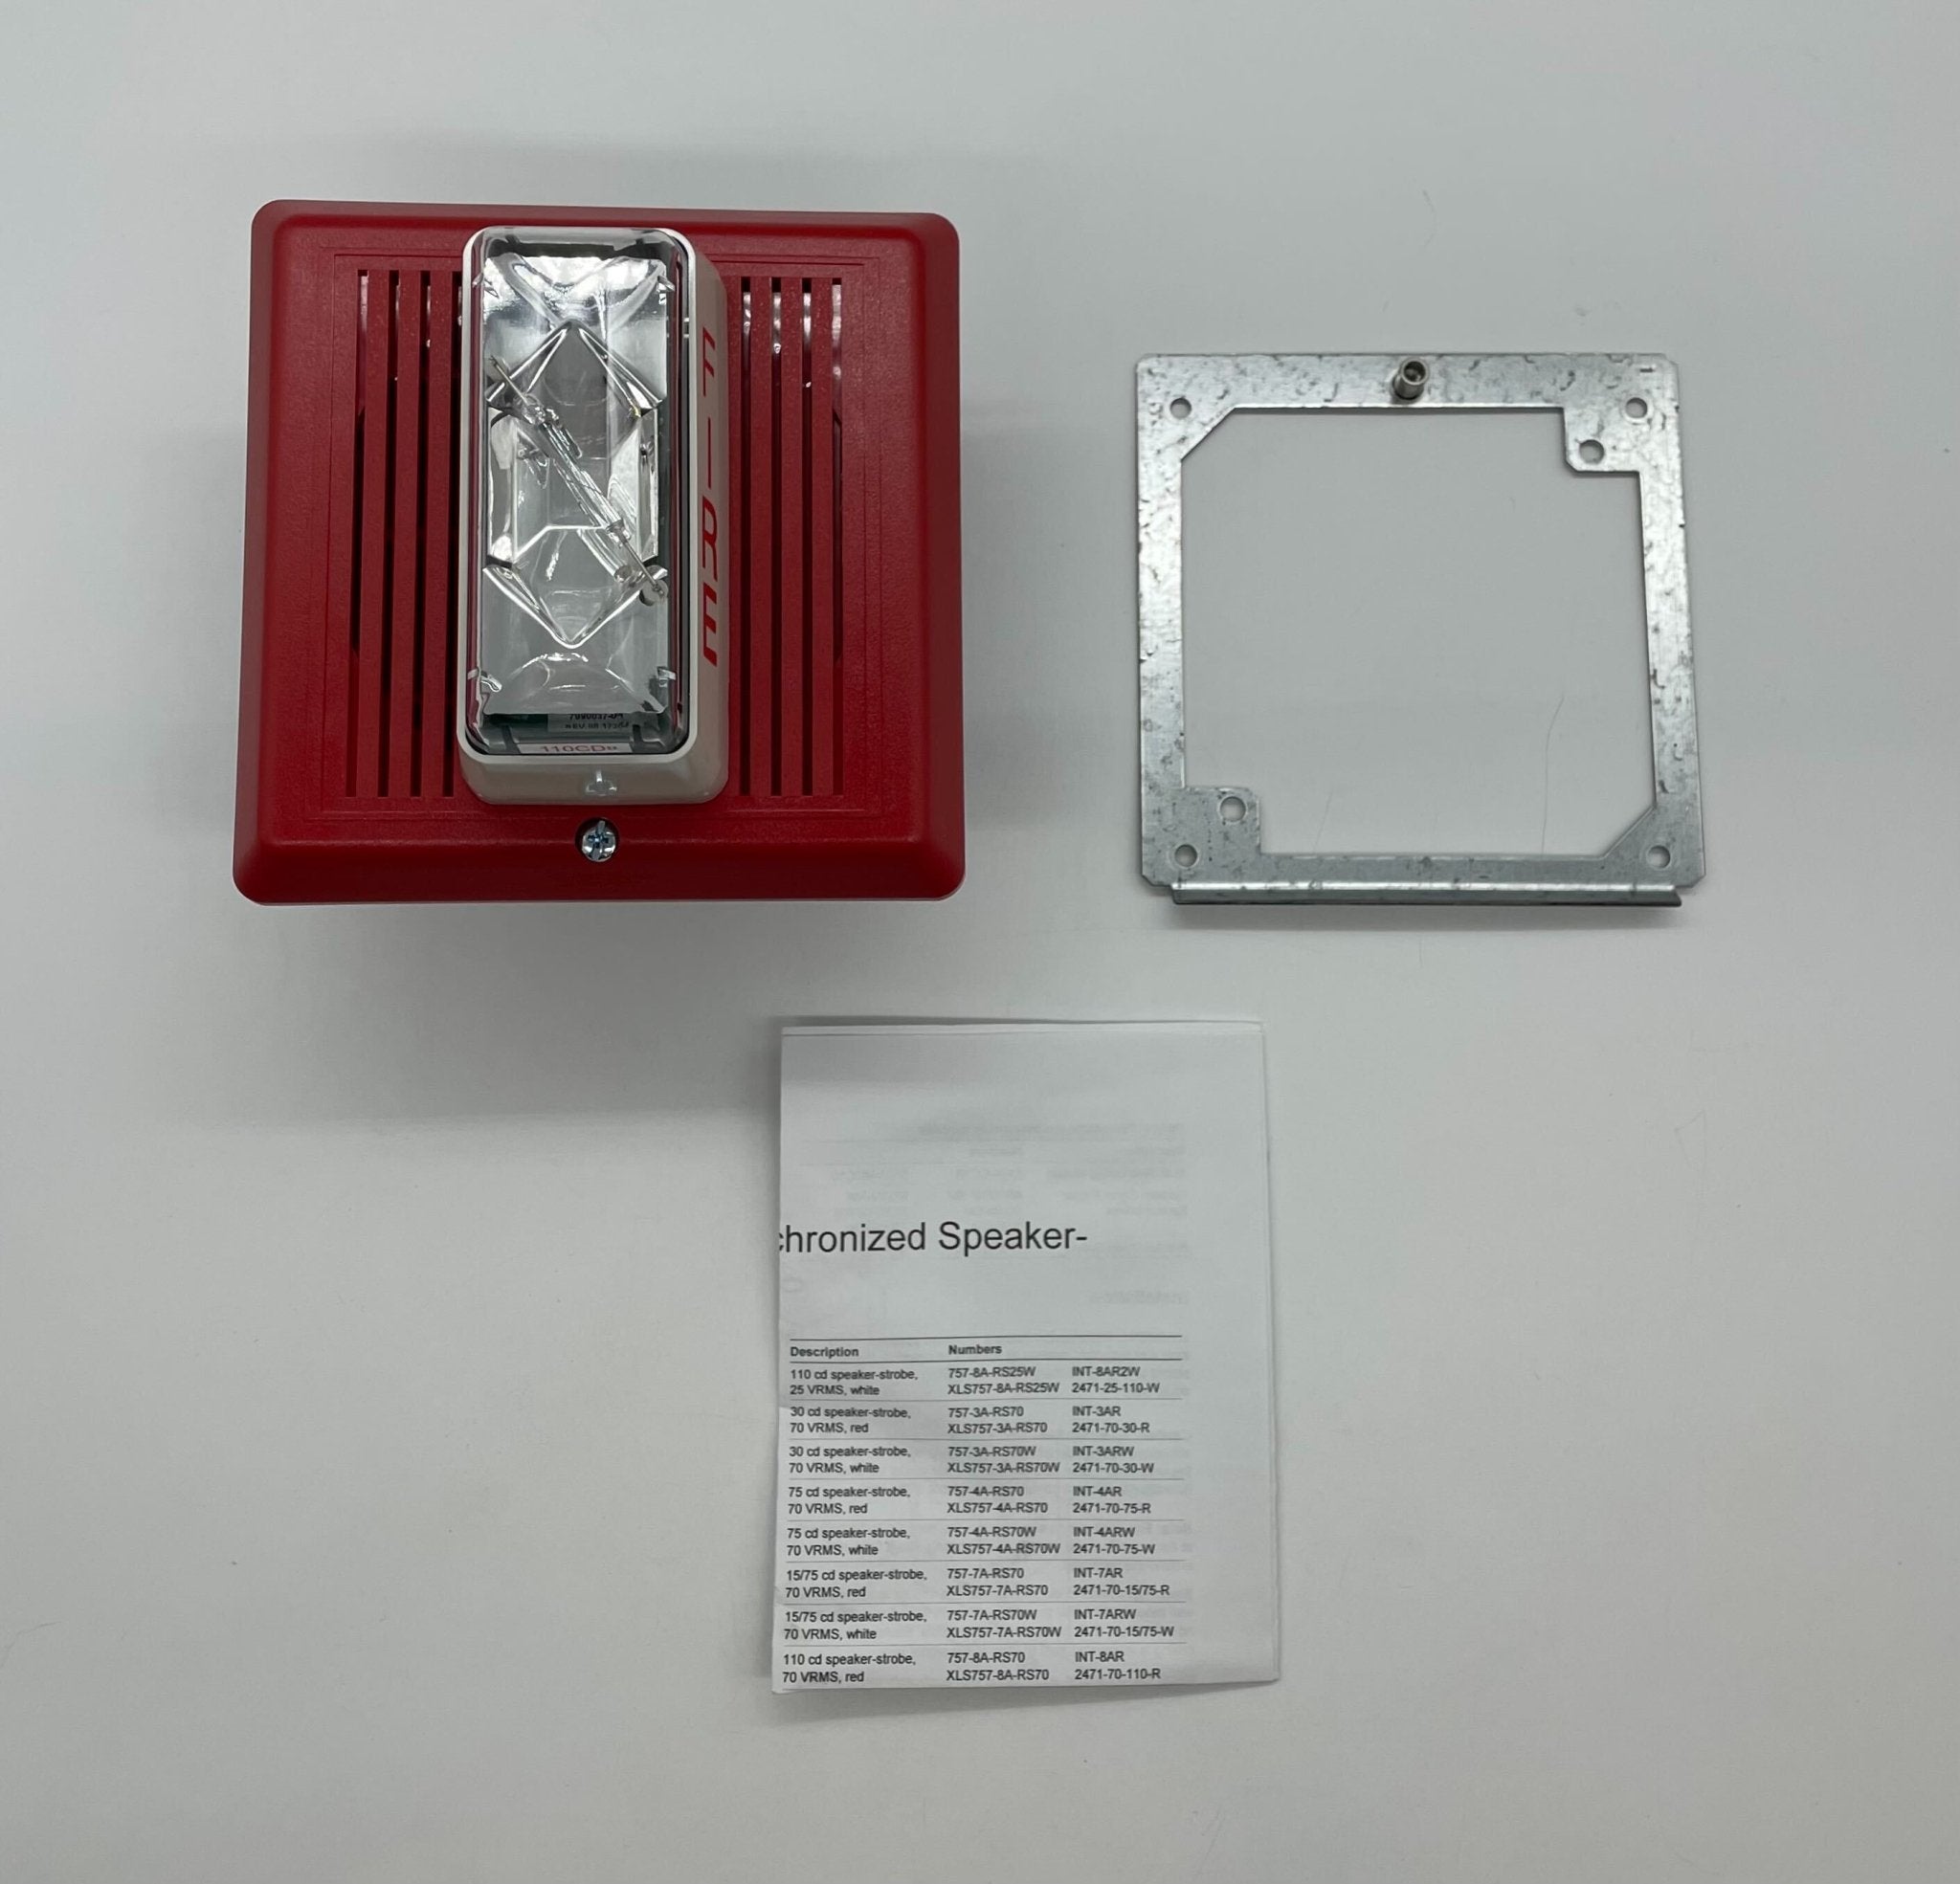 Edwards 757-8A-RS25 - The Fire Alarm Supplier